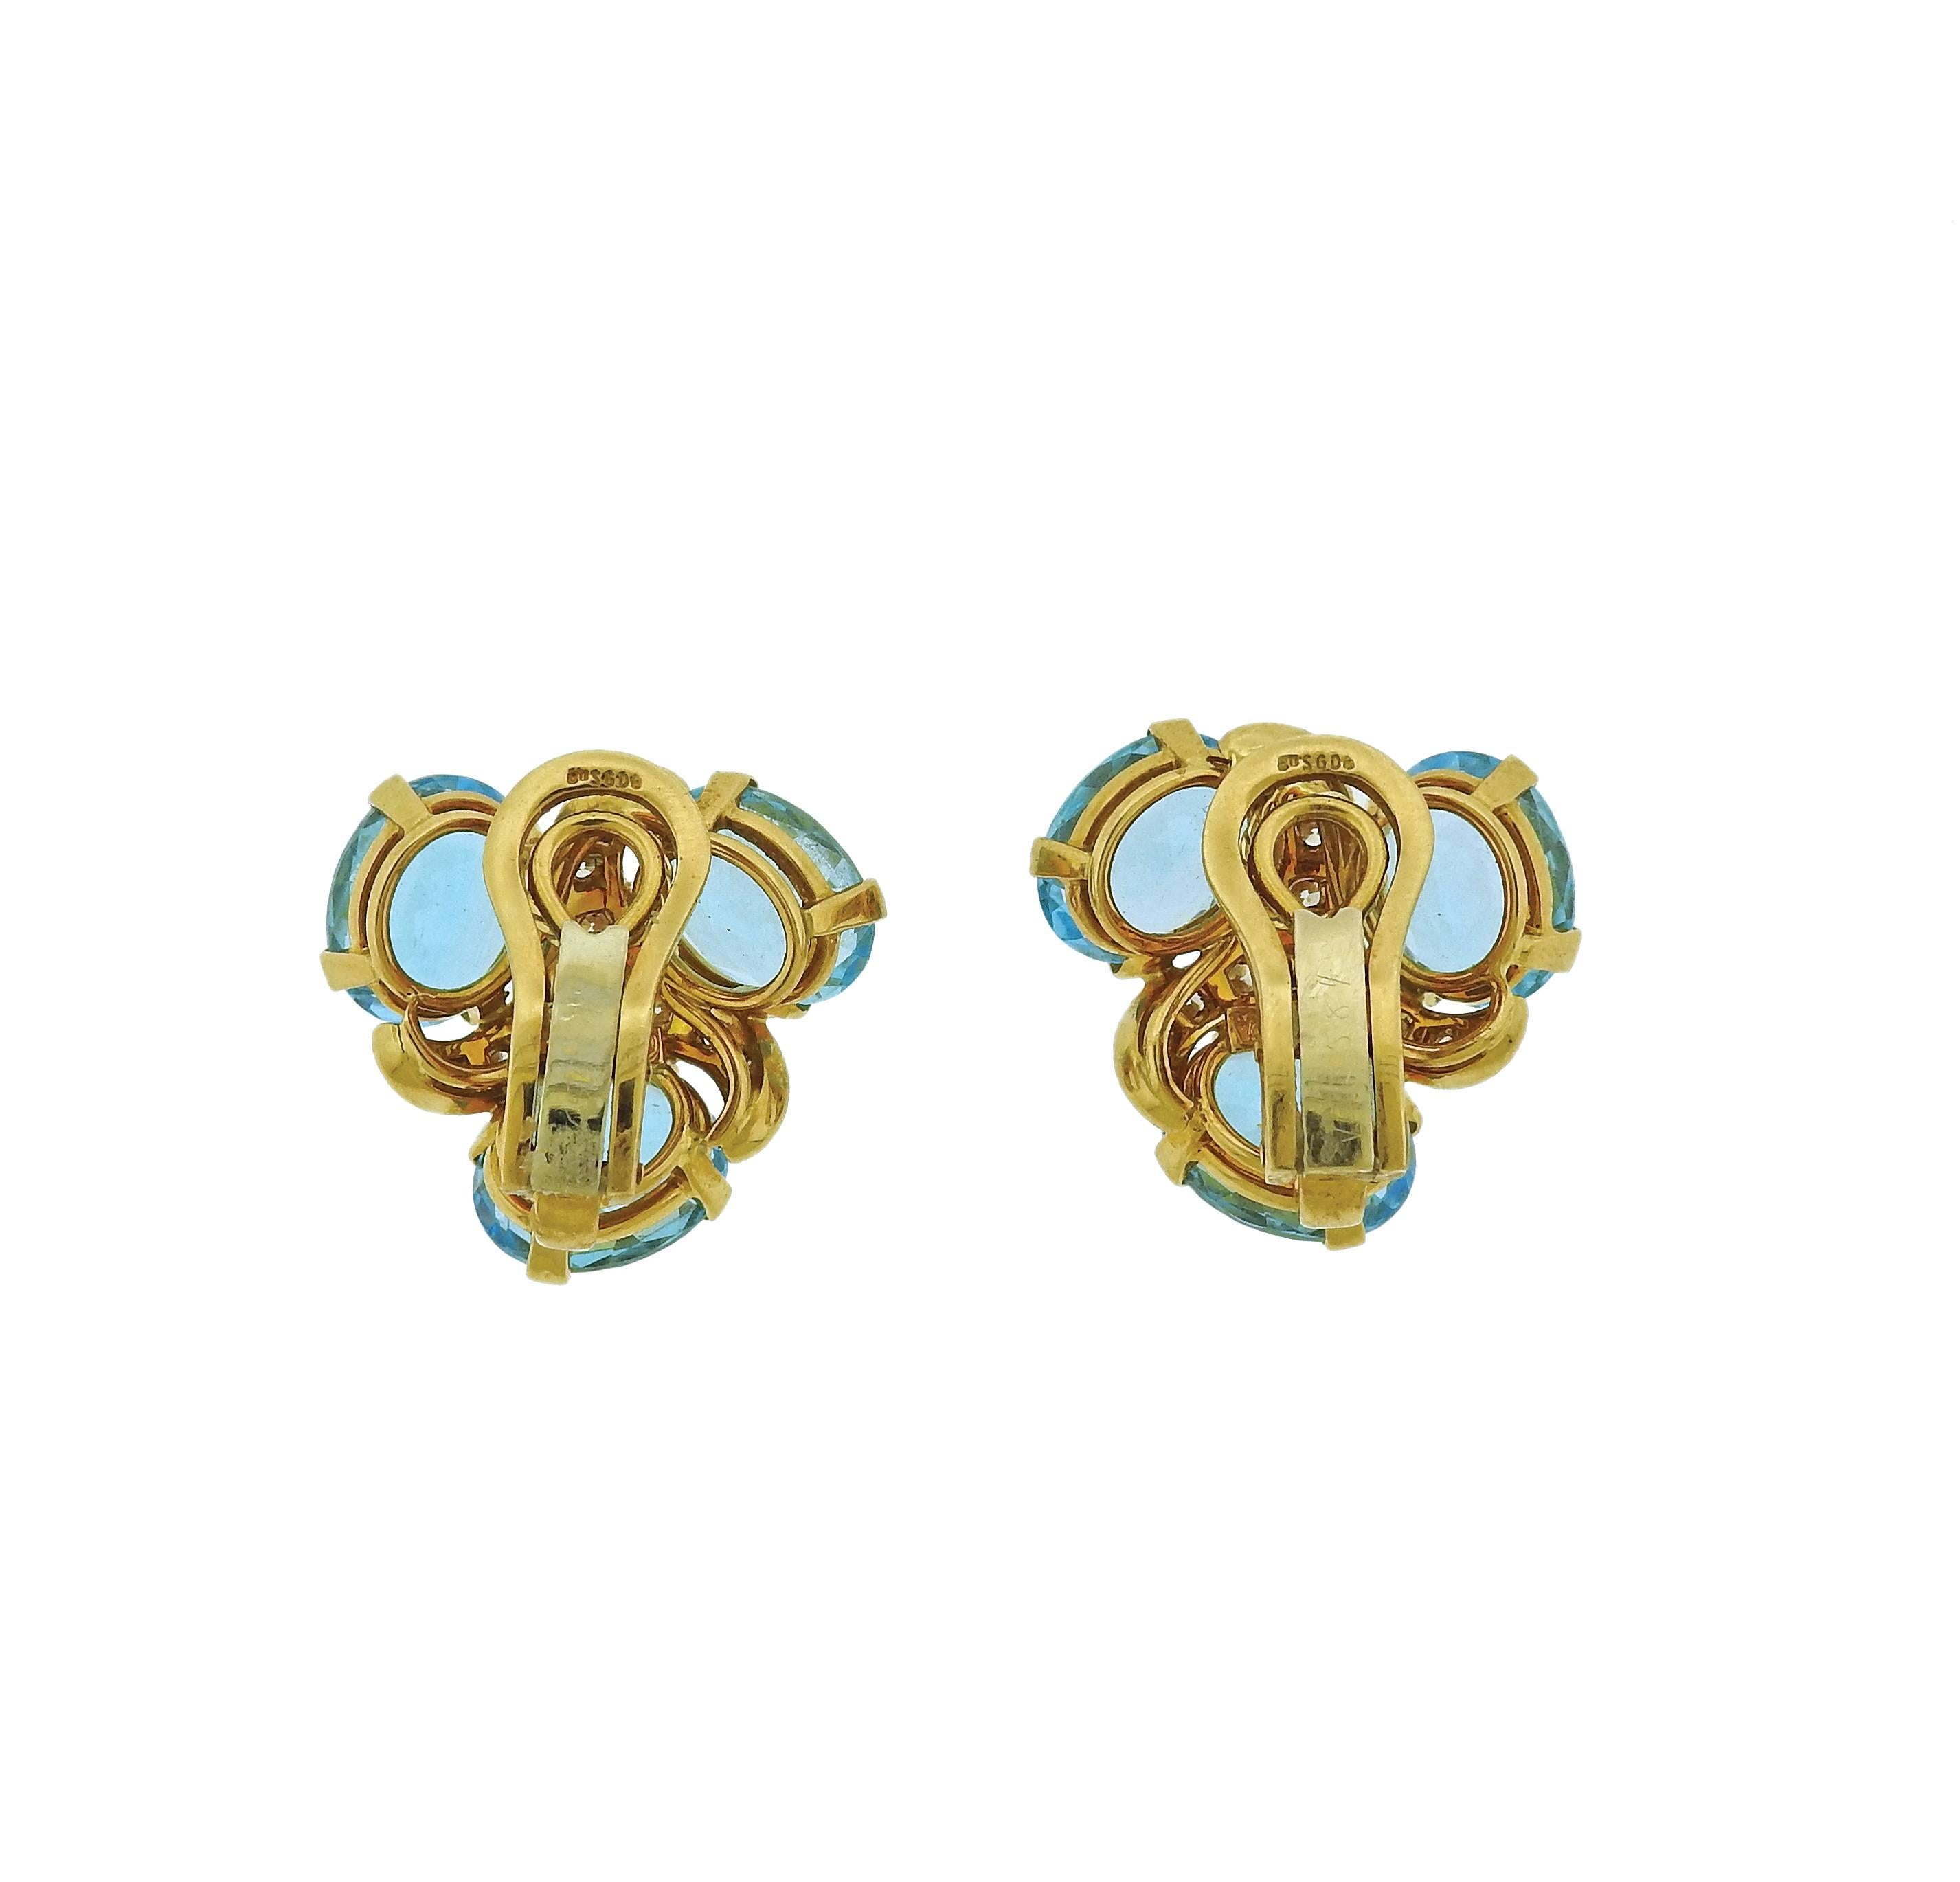 Pair of 18k yellow gold earrings, crafted by Verdura, decorated with blue topaz and approximately 0.90ctw in G/VS diamonds. Earrings are 21mm x 21mm  and weigh 16.9 grams. Marked: Verdura 750, 1077HI